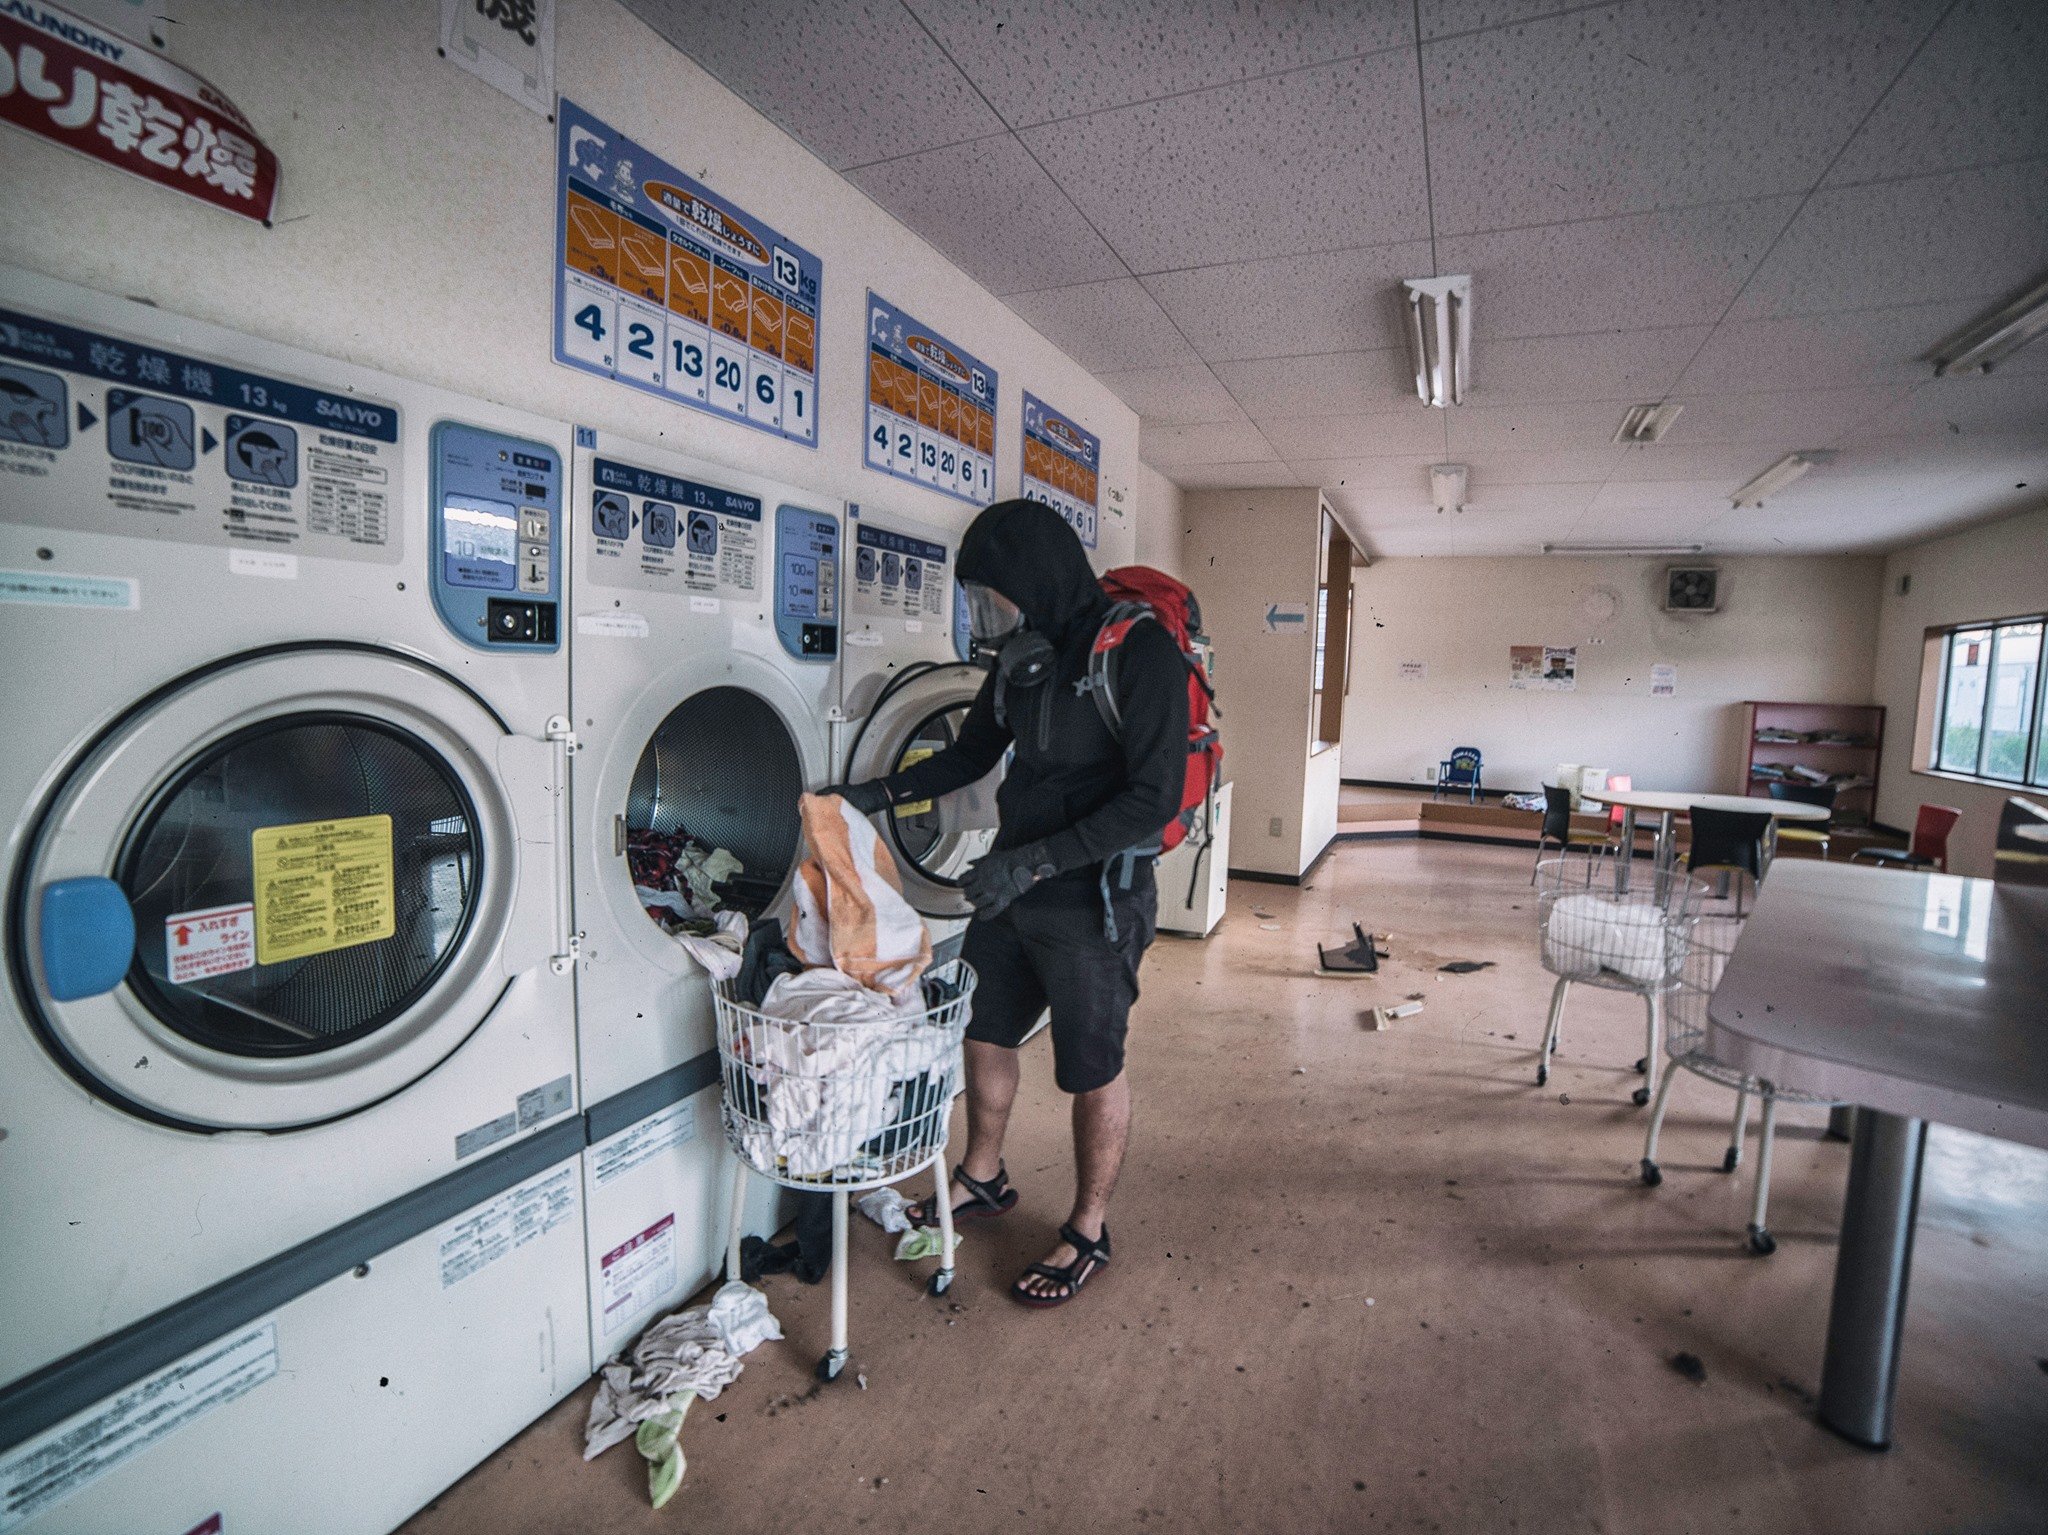 Laundromat in Fukushima. Courtesy of Keow Wee Loong.